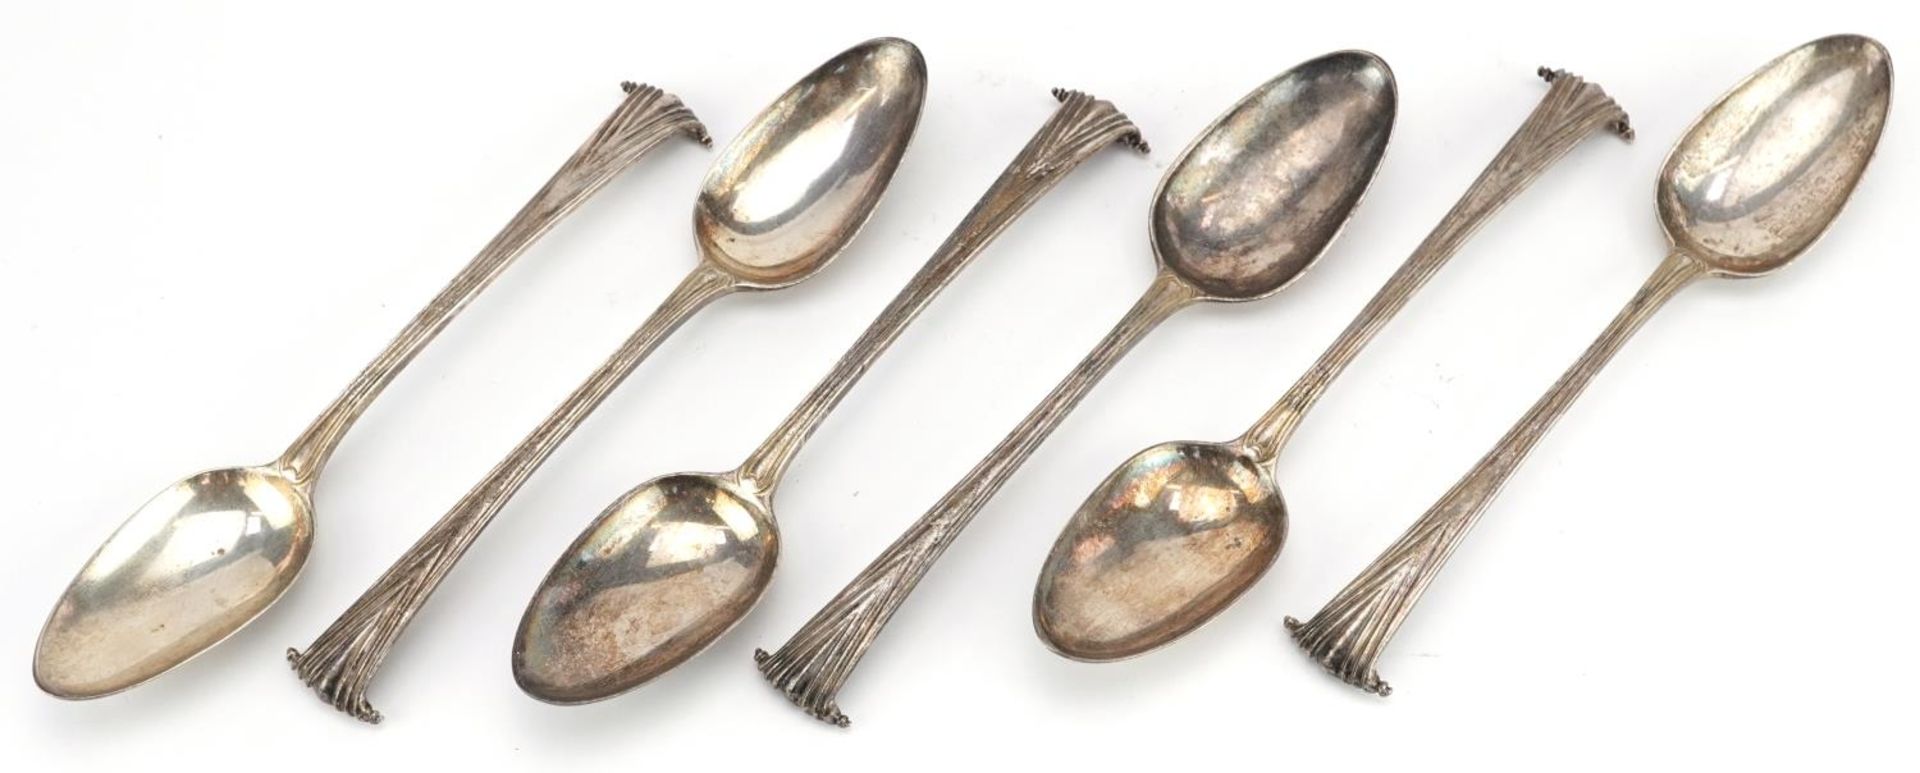 Richard Crossley, set of six George III silver spoons, London 1788, 17cm in length, 233.0g : For